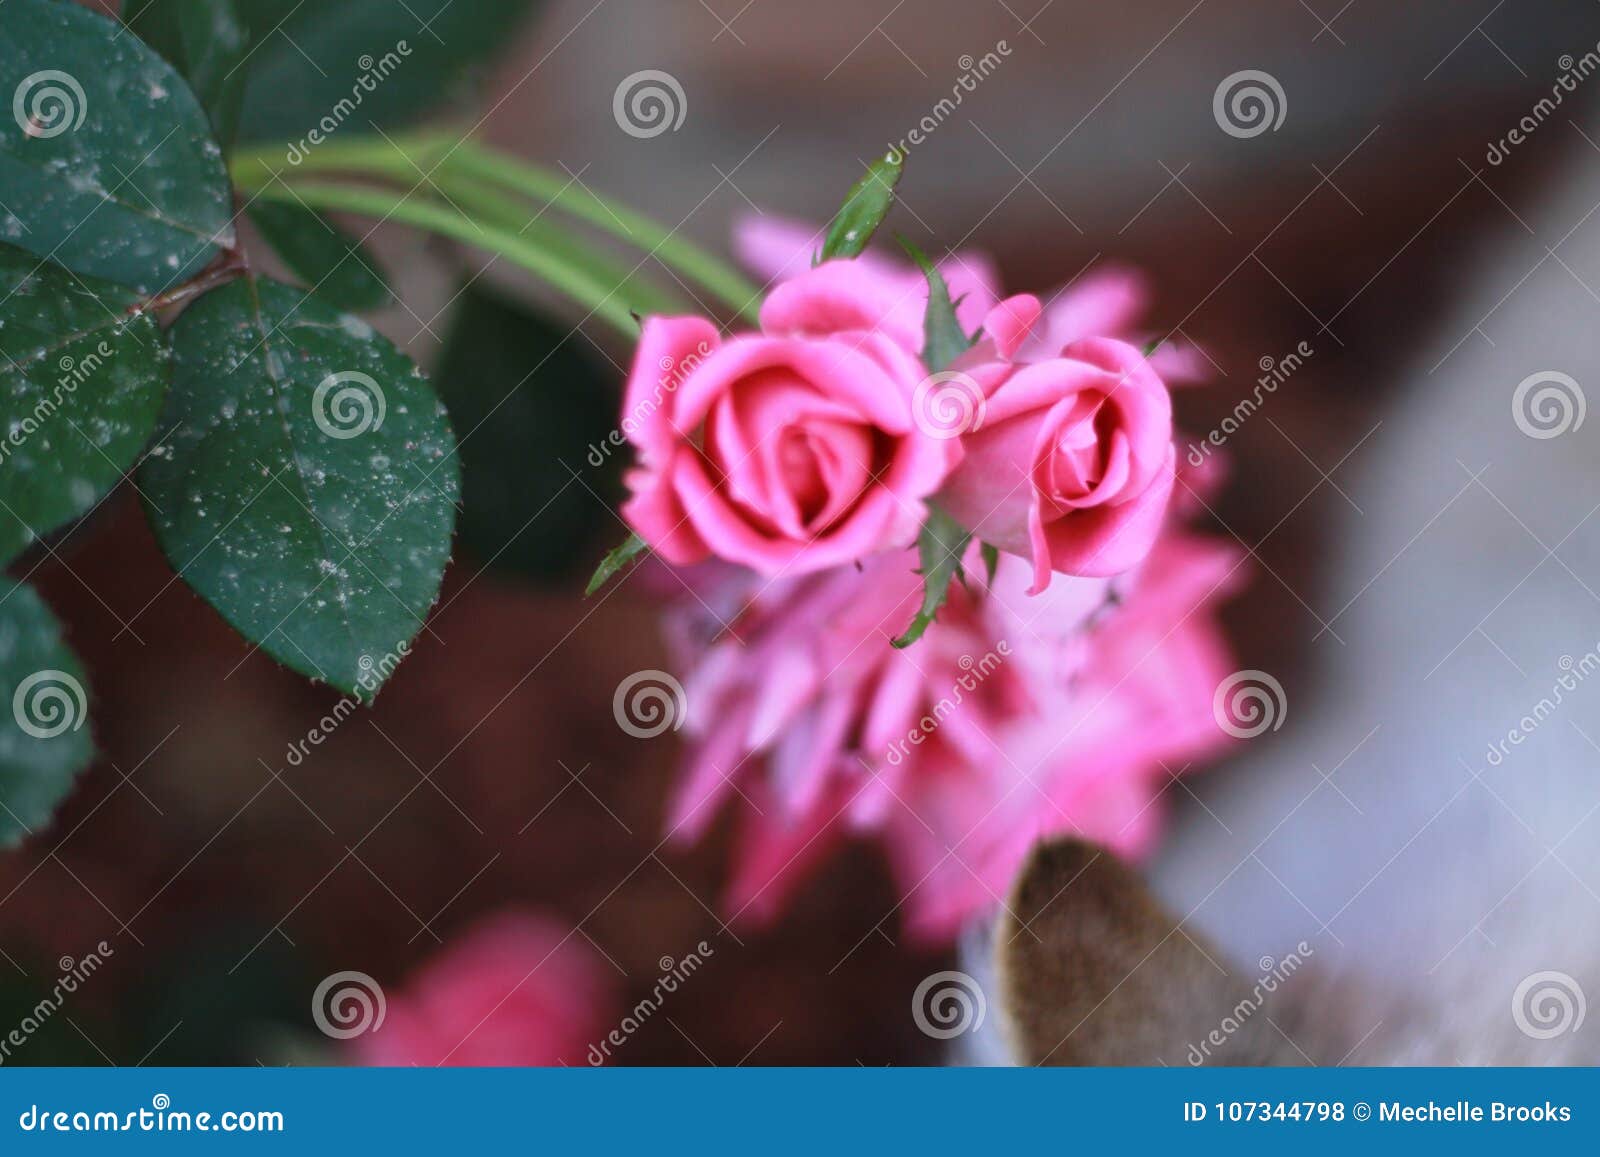 Cluster of Knock Out Pink Roses Stock Photo - Image of stems, flower ...